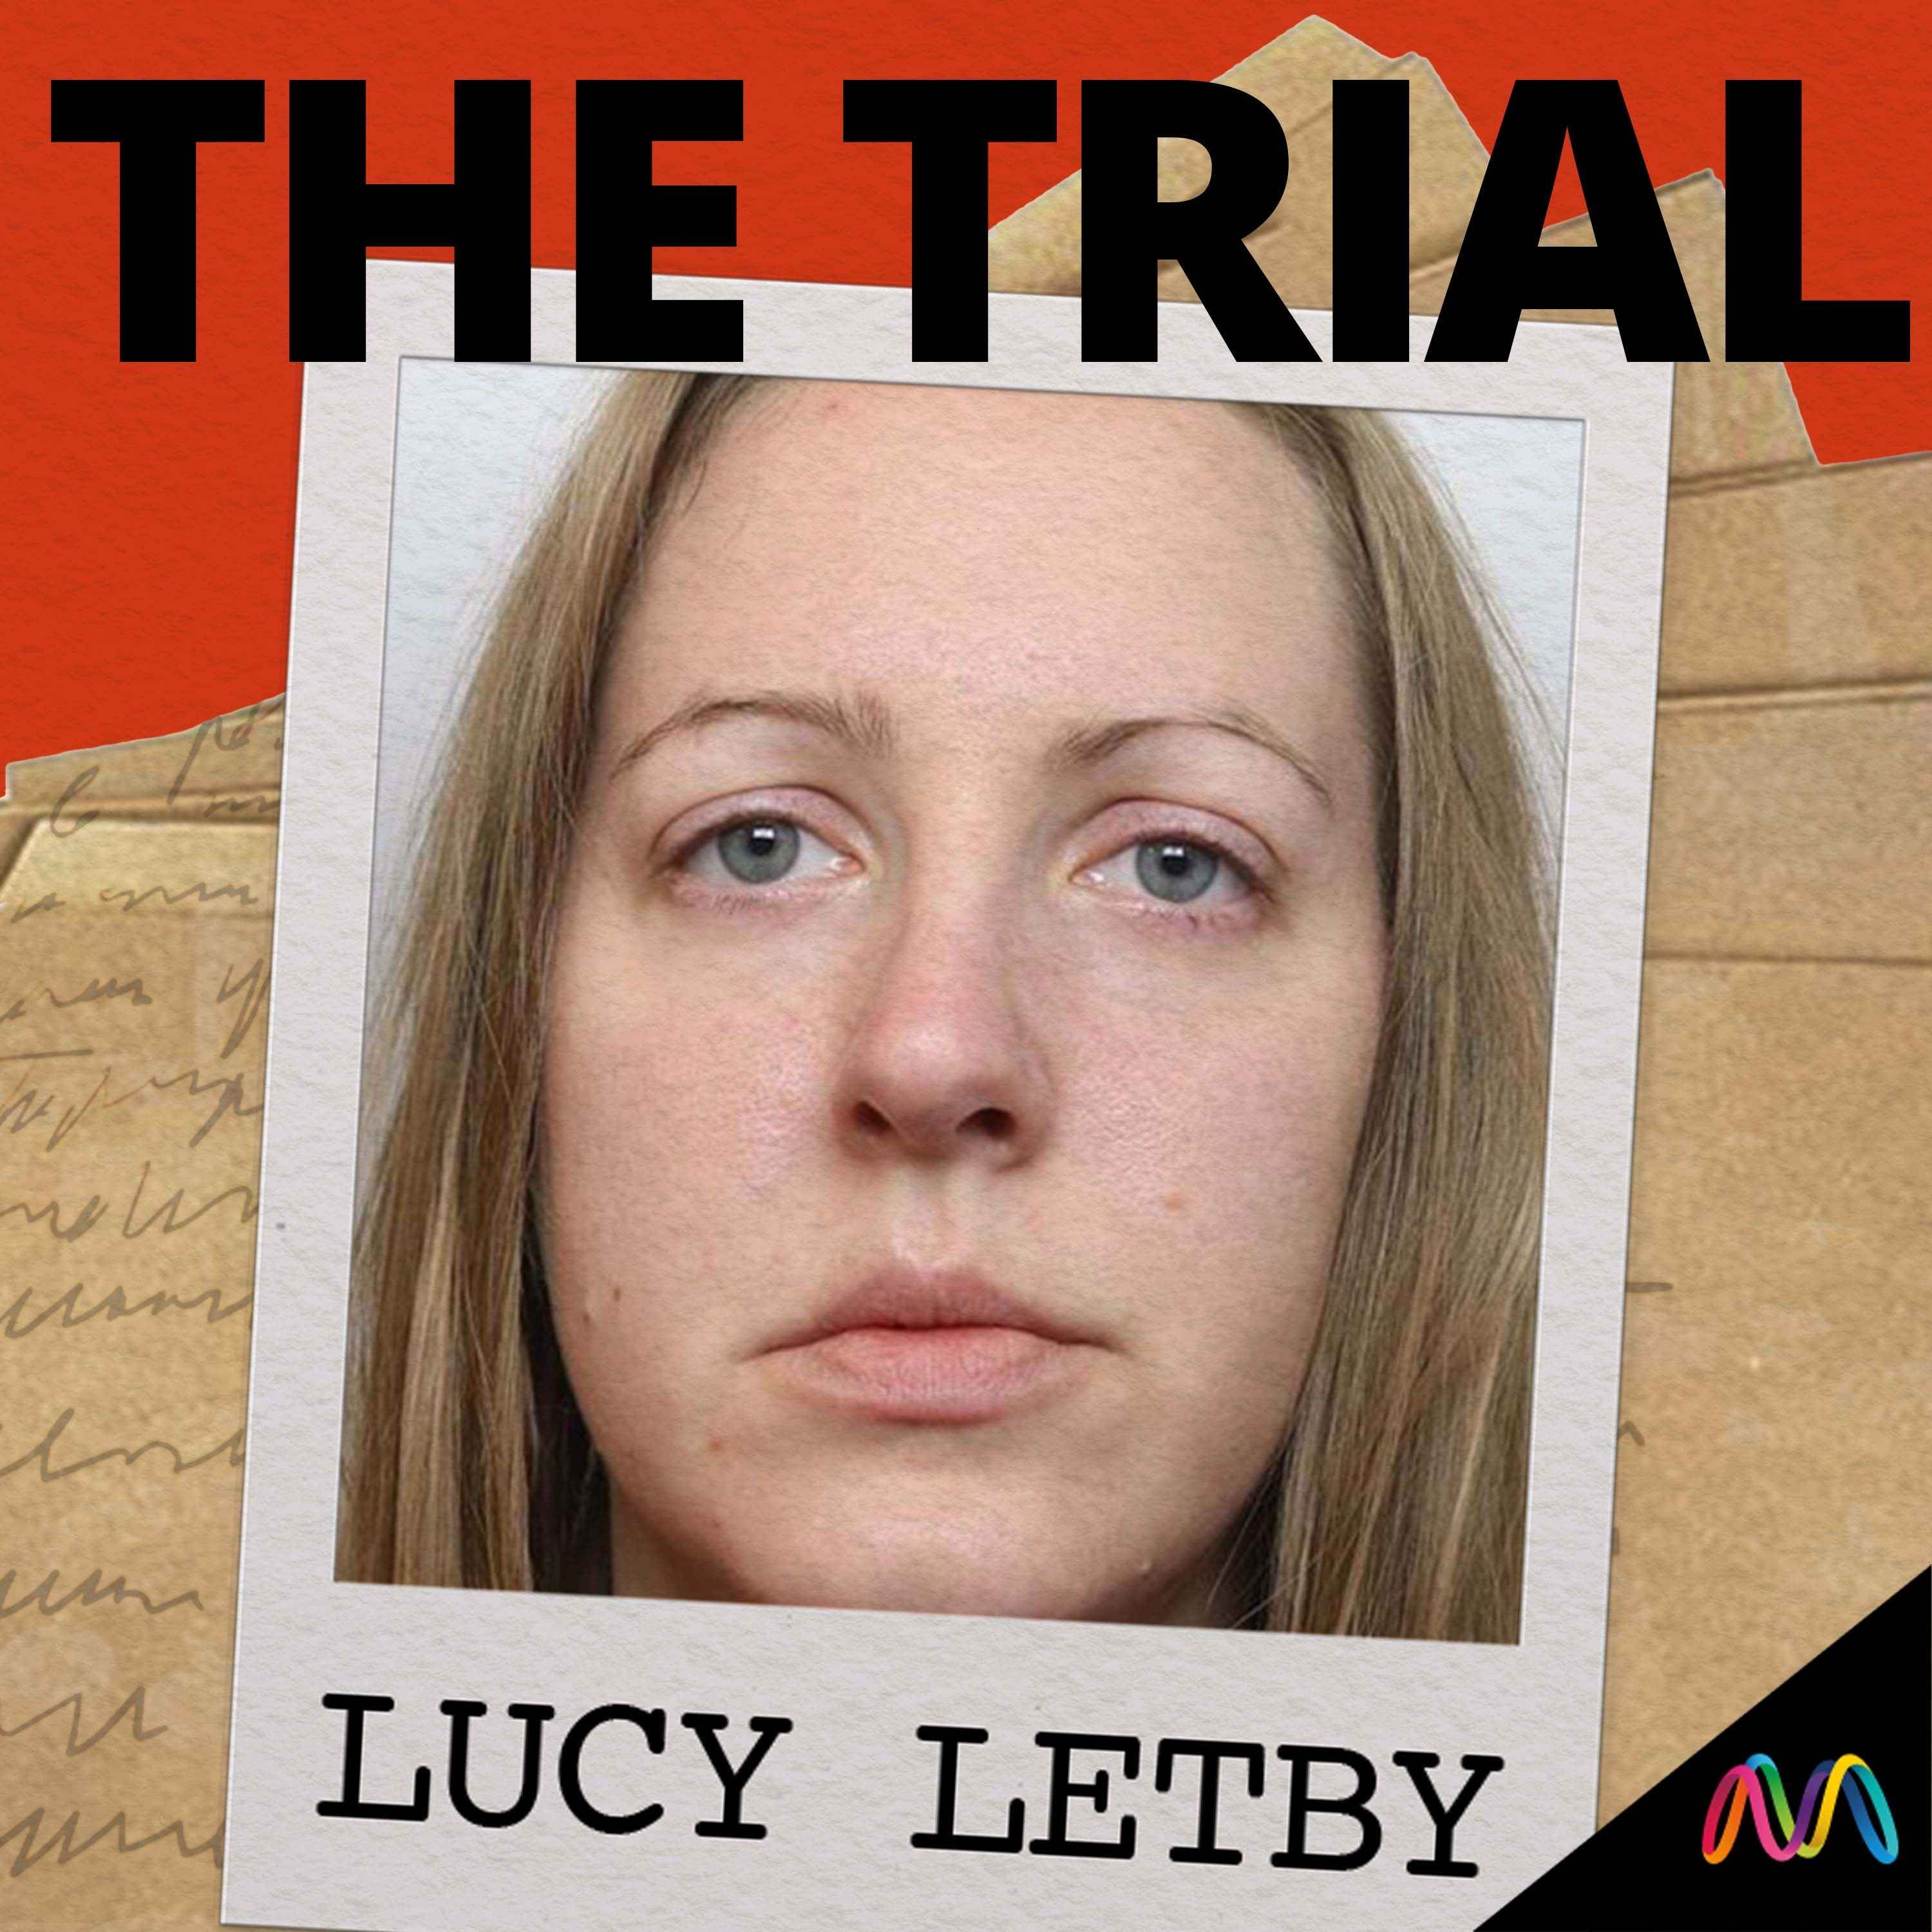 Lucy Letby: Baby I: “Our daughter could go from perfectly fine to nearly dying in seconds.”